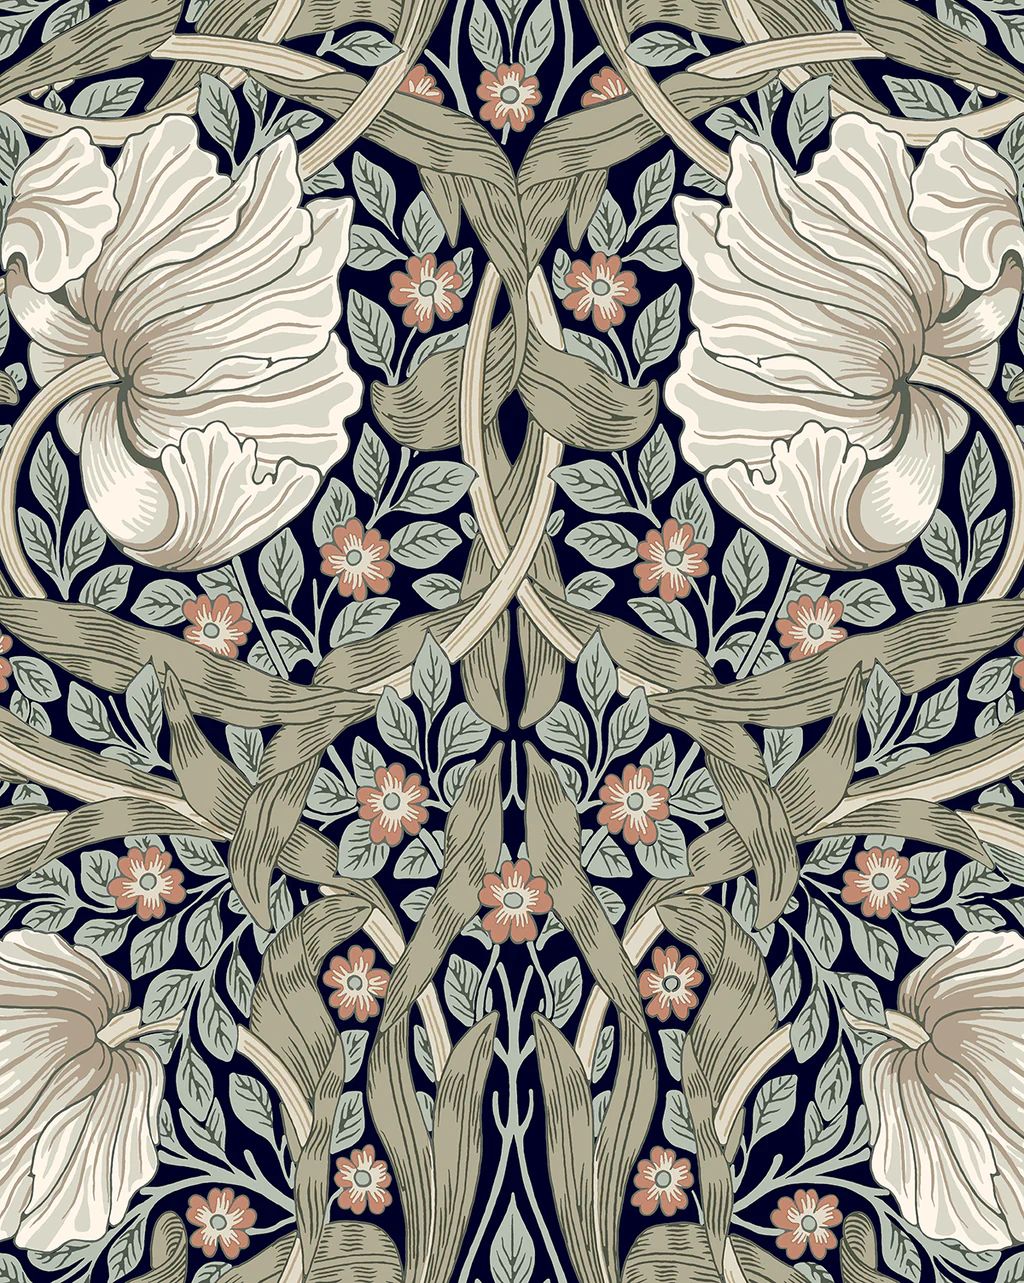 Morris & Co. x McGee & Co. Pimpernel Ink Wallpaper | McGee & Co.